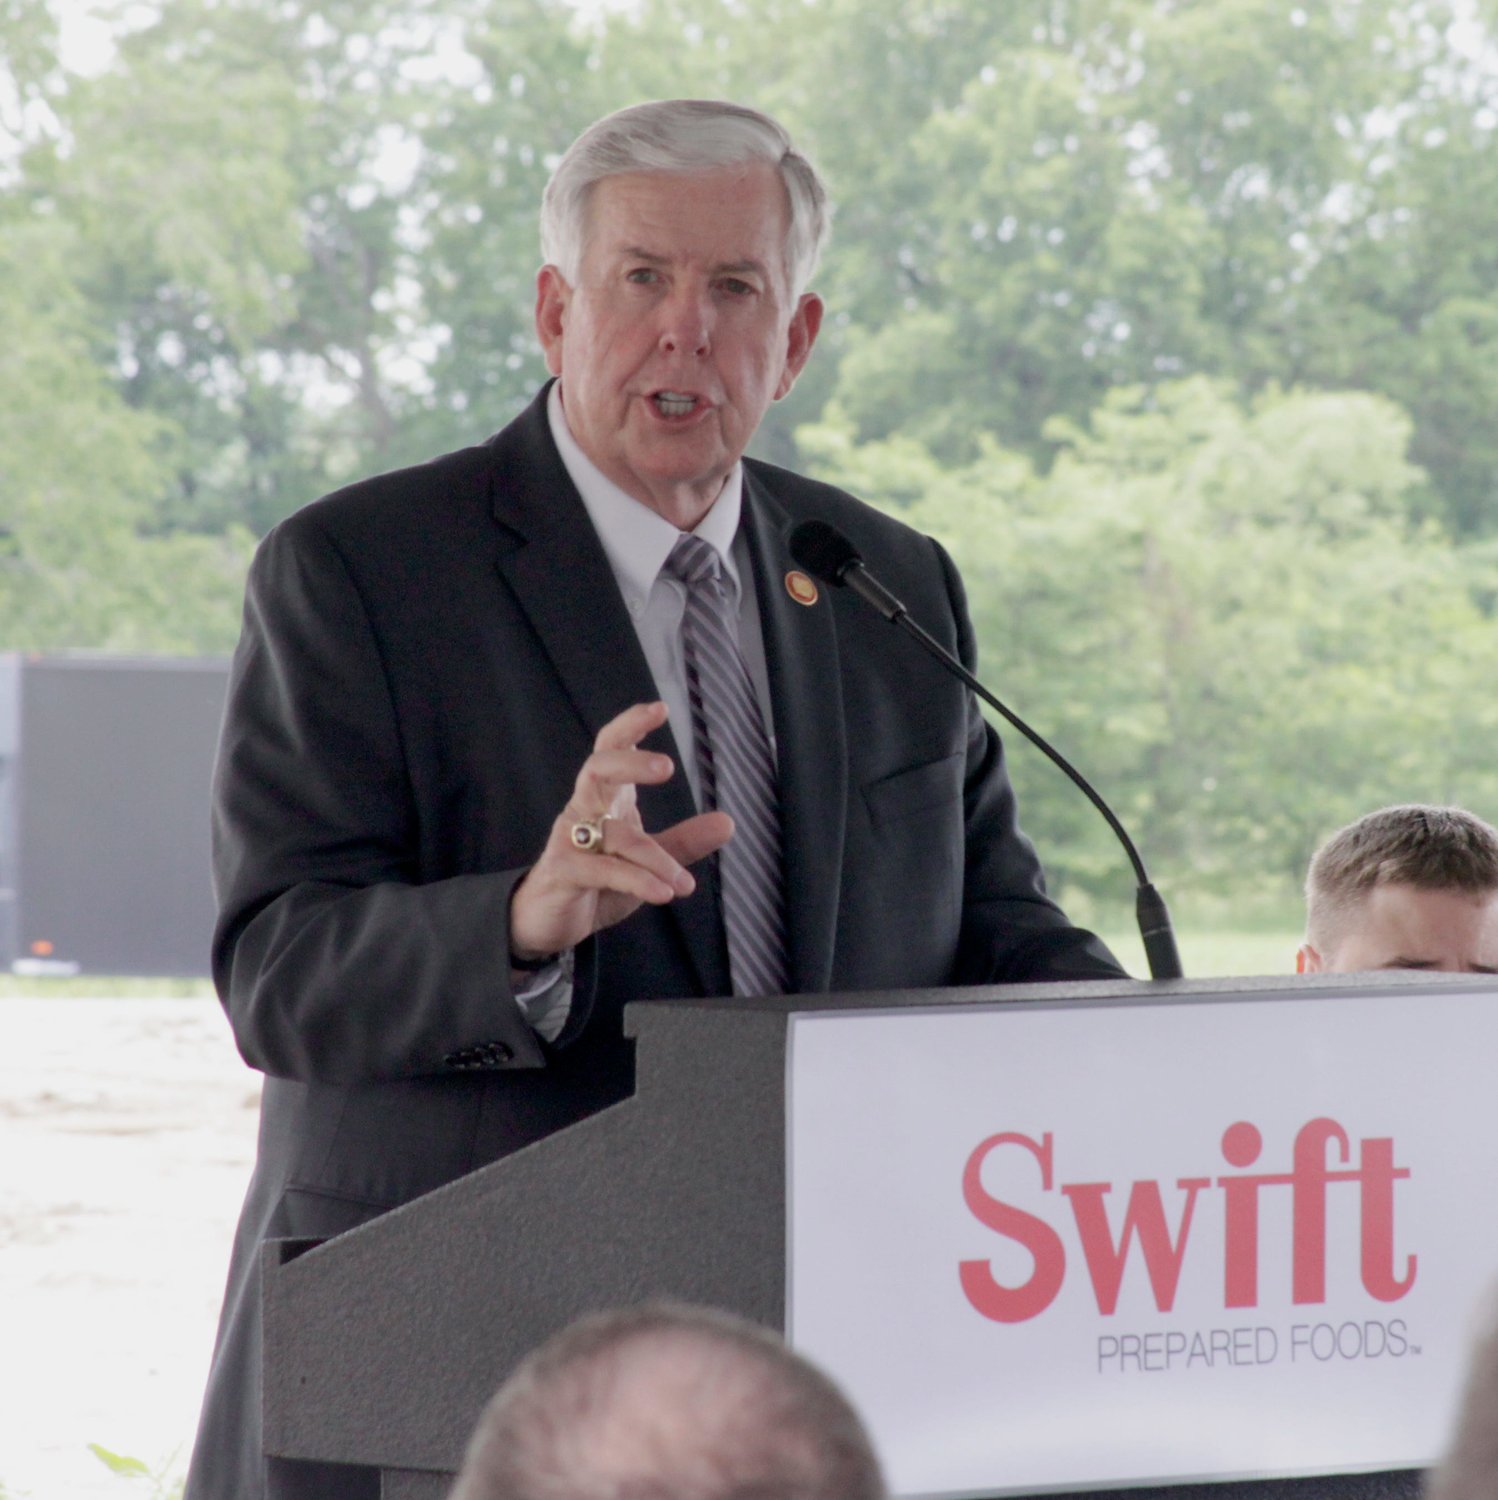 Missouri Governor Mike Parson informs the estimated 75 persons that gathered in Moberly on Monday, May 24 to celebrate the opening of the new Swift Prepared Foods facility about how strong the state's economy recently been.